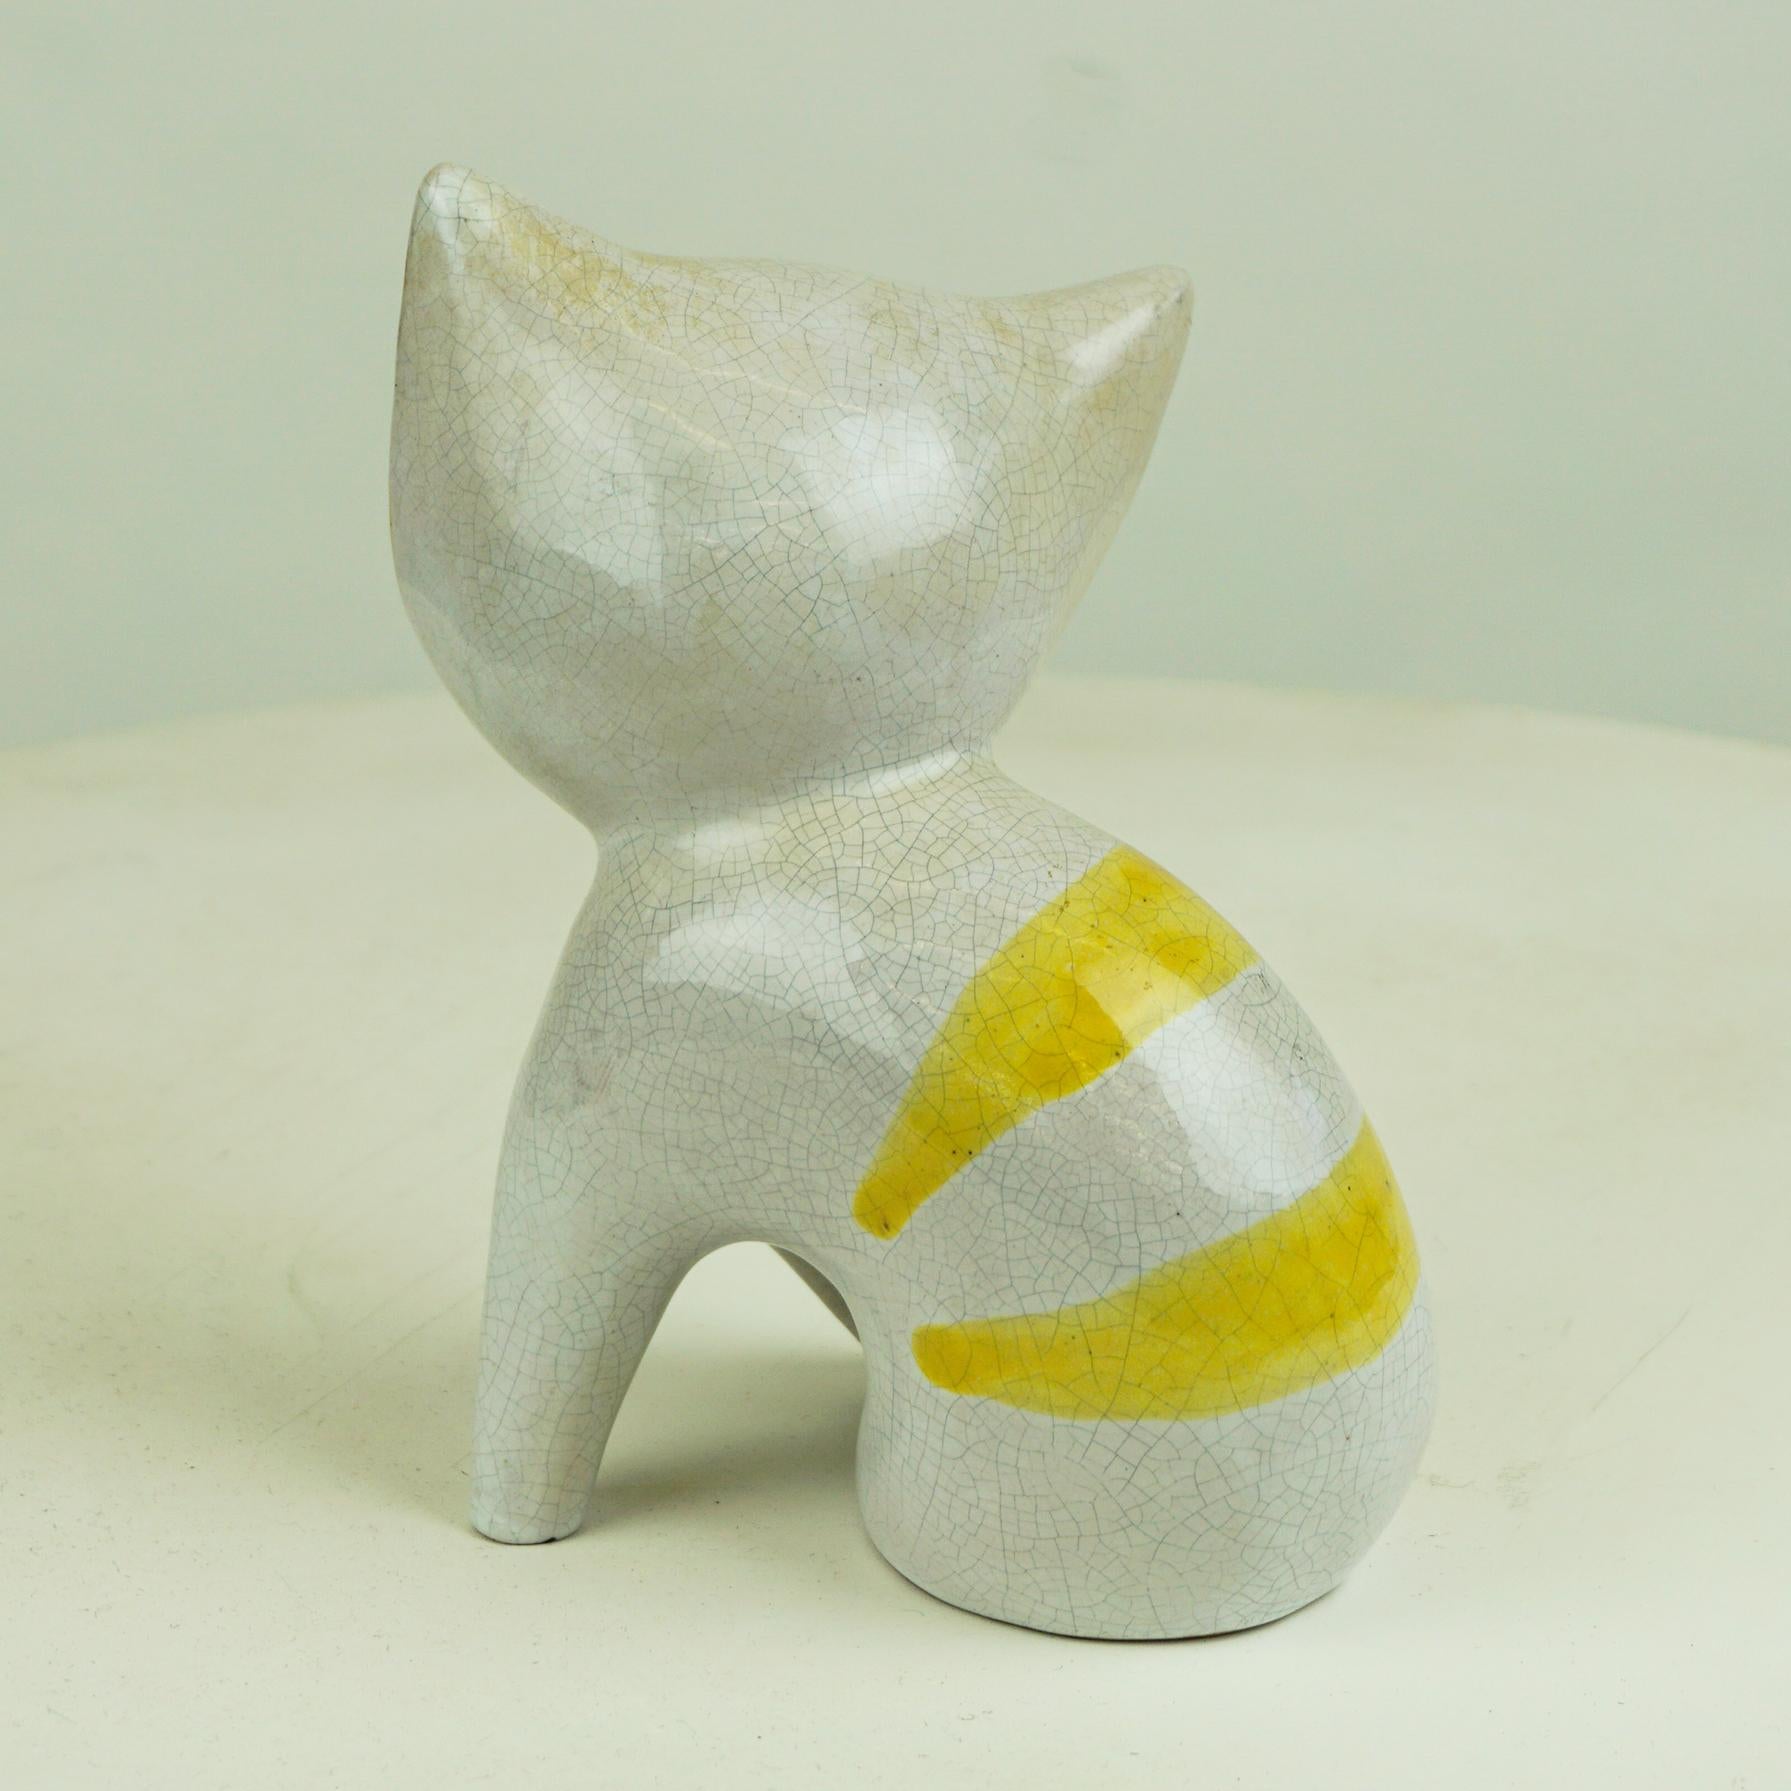 Austrian Midcentury White and Yellow Glazed Ceramic Cat by Leopold Anzengruber 1